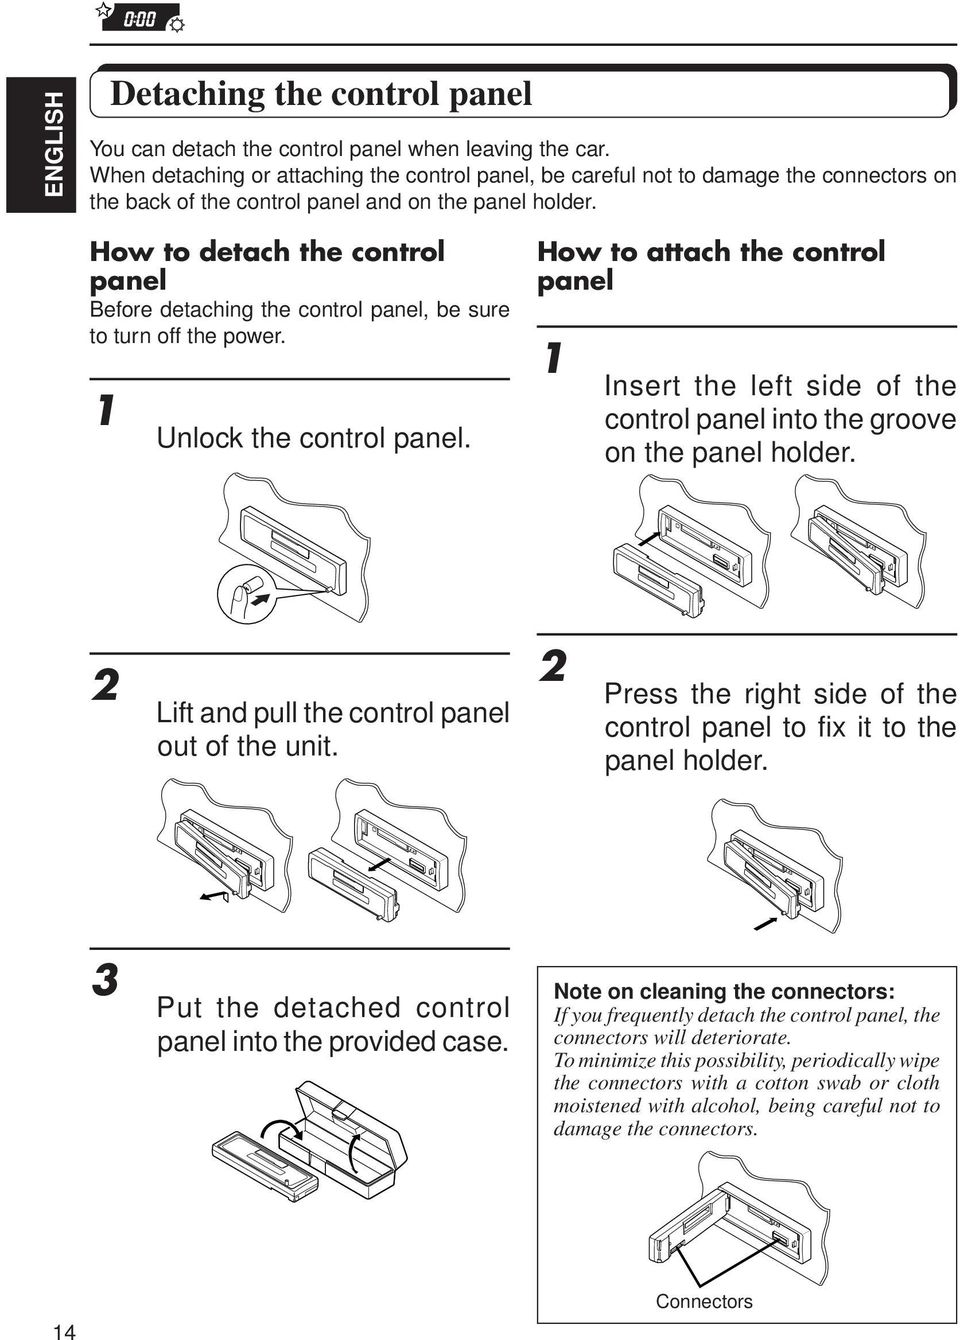 How to detach the control panel Before detaching the control panel, be sure to turn off the power. Unlock the control panel.